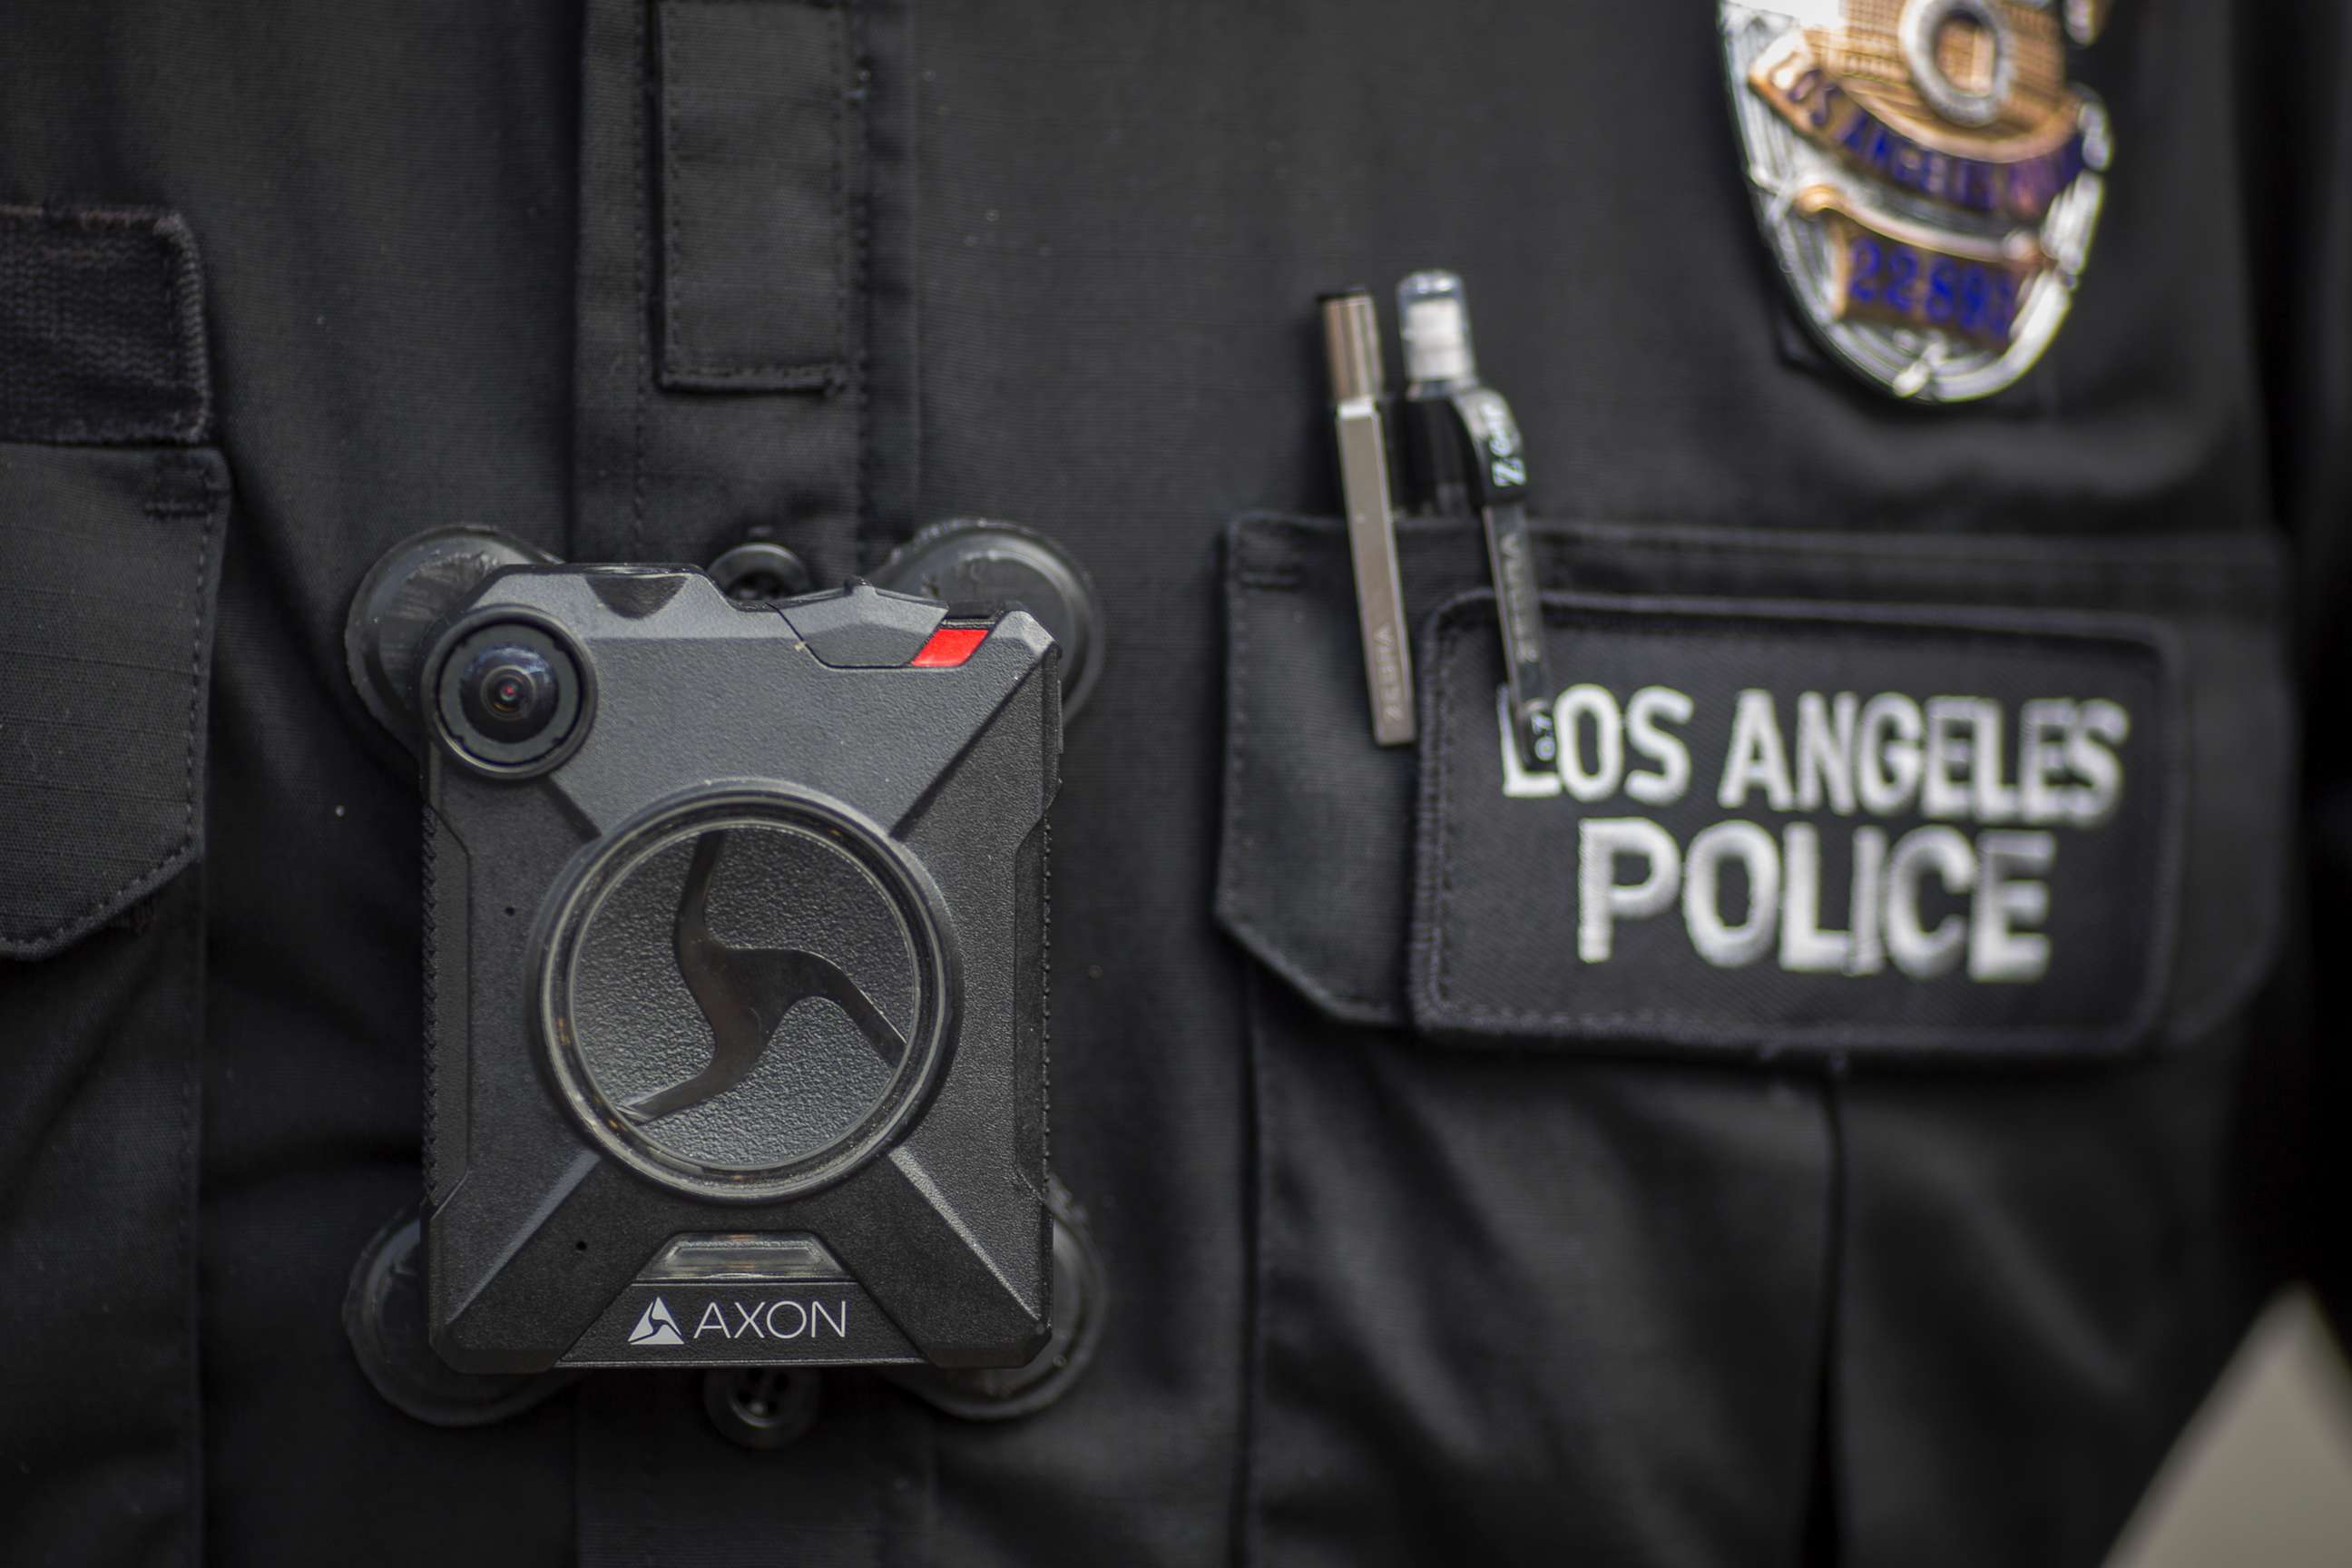 PHOTO: A Los Angeles police officer wears an AXON body camera, Feb. 18, 2017, in Los Angeles.